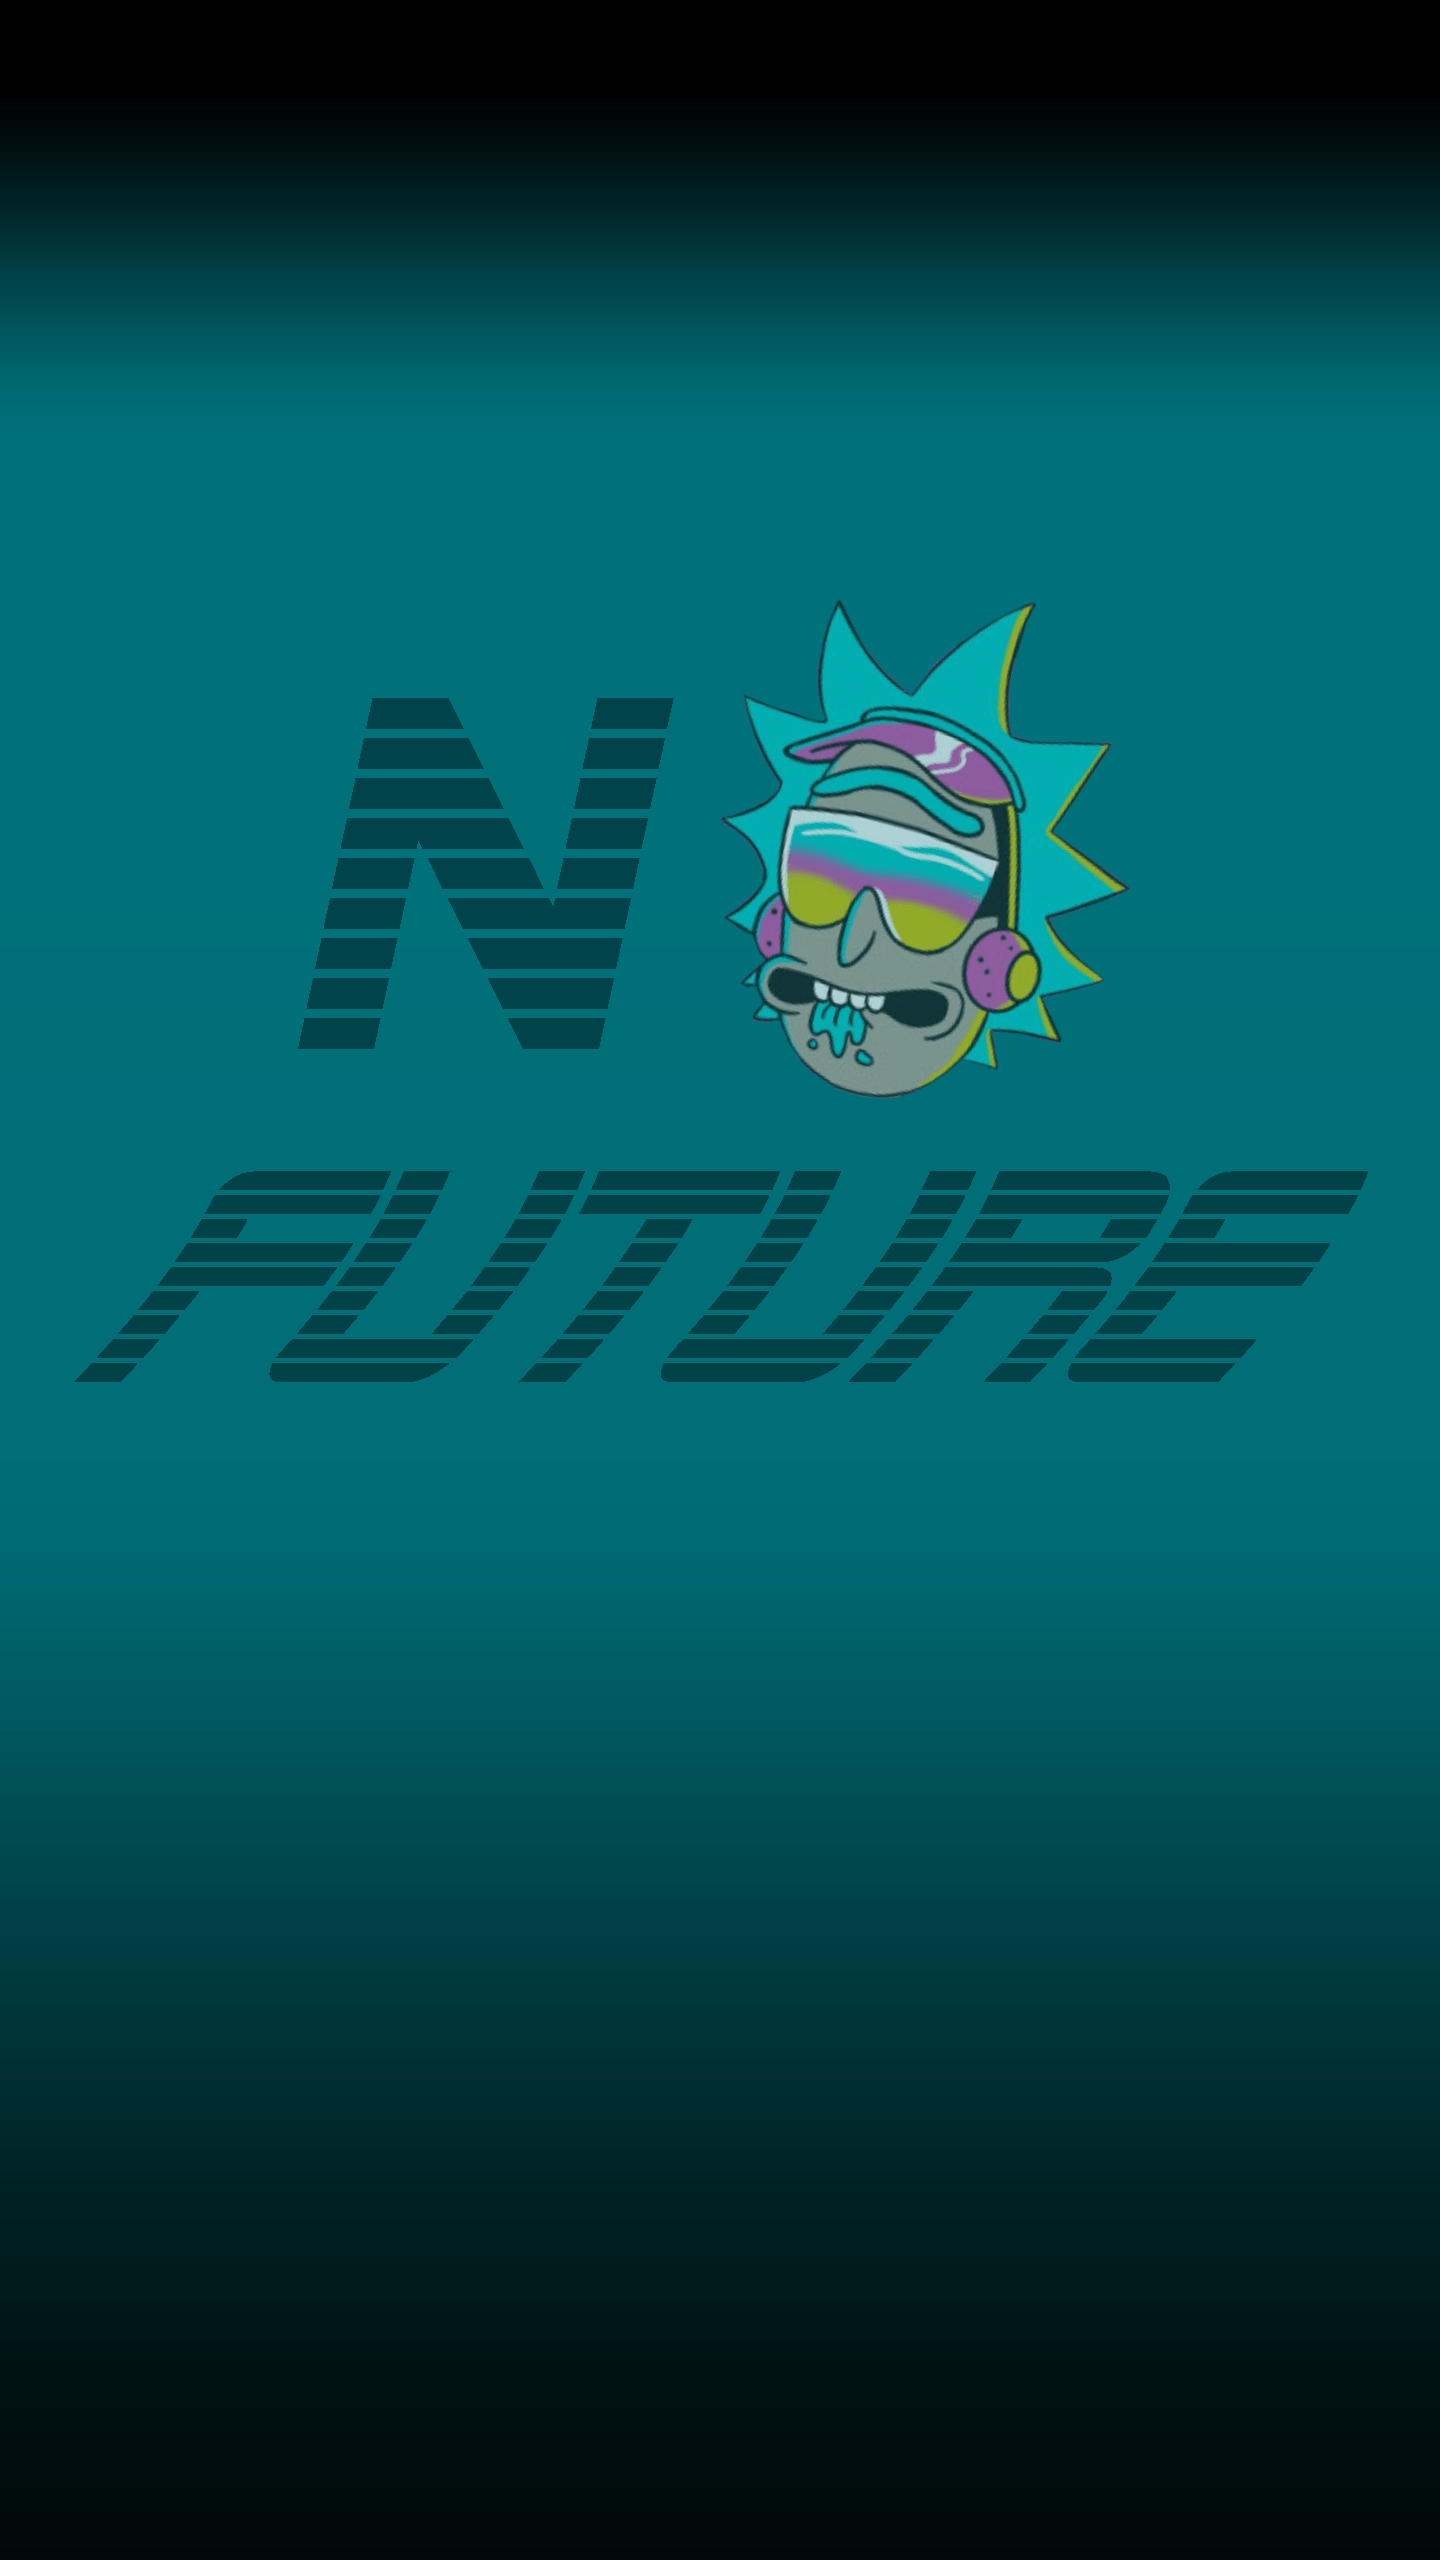 Rick and Morty 1440x2560 resolution wallpaper